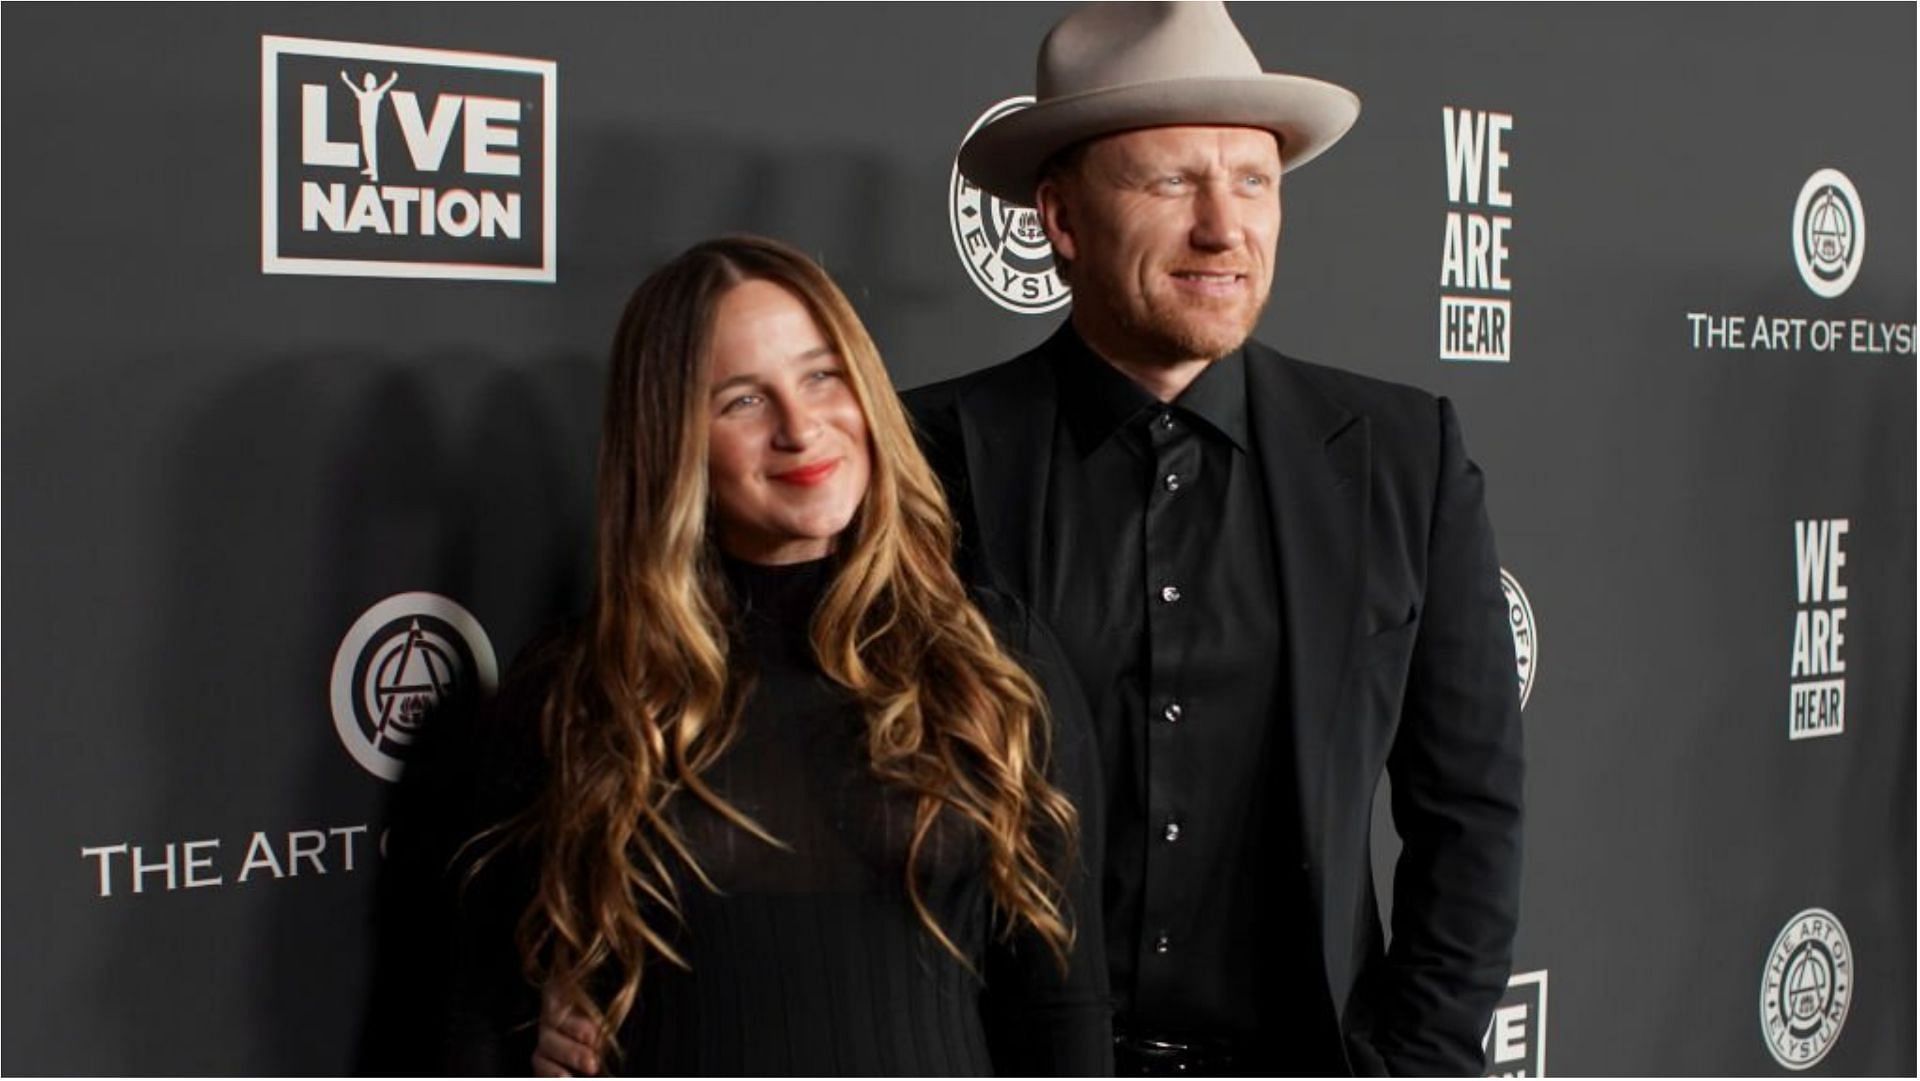 Kevin McKidd and Arielle McKidd are getting divorced (Image via Randy Shropshire/Getty Images)